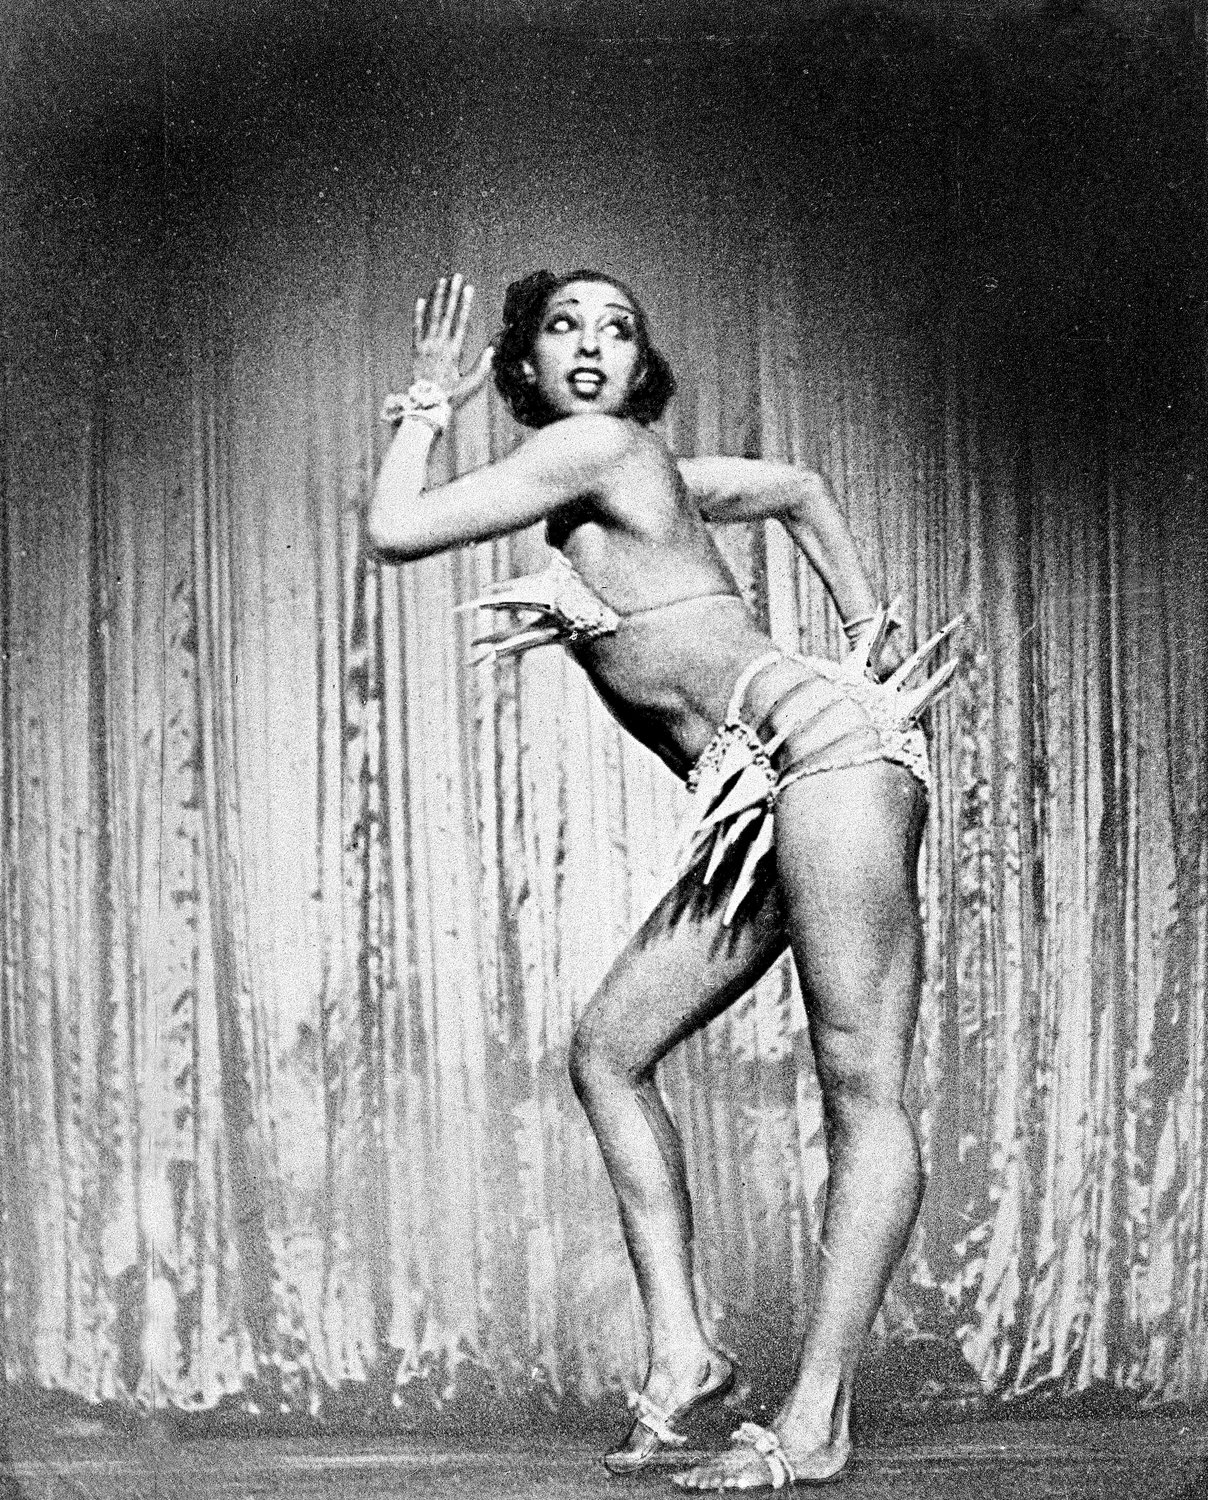 FILE - Performer Josephine Baker strikes a pose during her Ziegfeld Follies performance of "The Conga" on the Winter Garden Theater stage in New York, Feb. 11, 1936. France is inducting Josephine Baker ‚Äì Missouri-born cabaret dancer, French Resistance fighter and civil rights leader ‚Äì into its Pantheon, the first Black woman honored in the final resting place of France's most revered luminaries. (AP Photo, File)